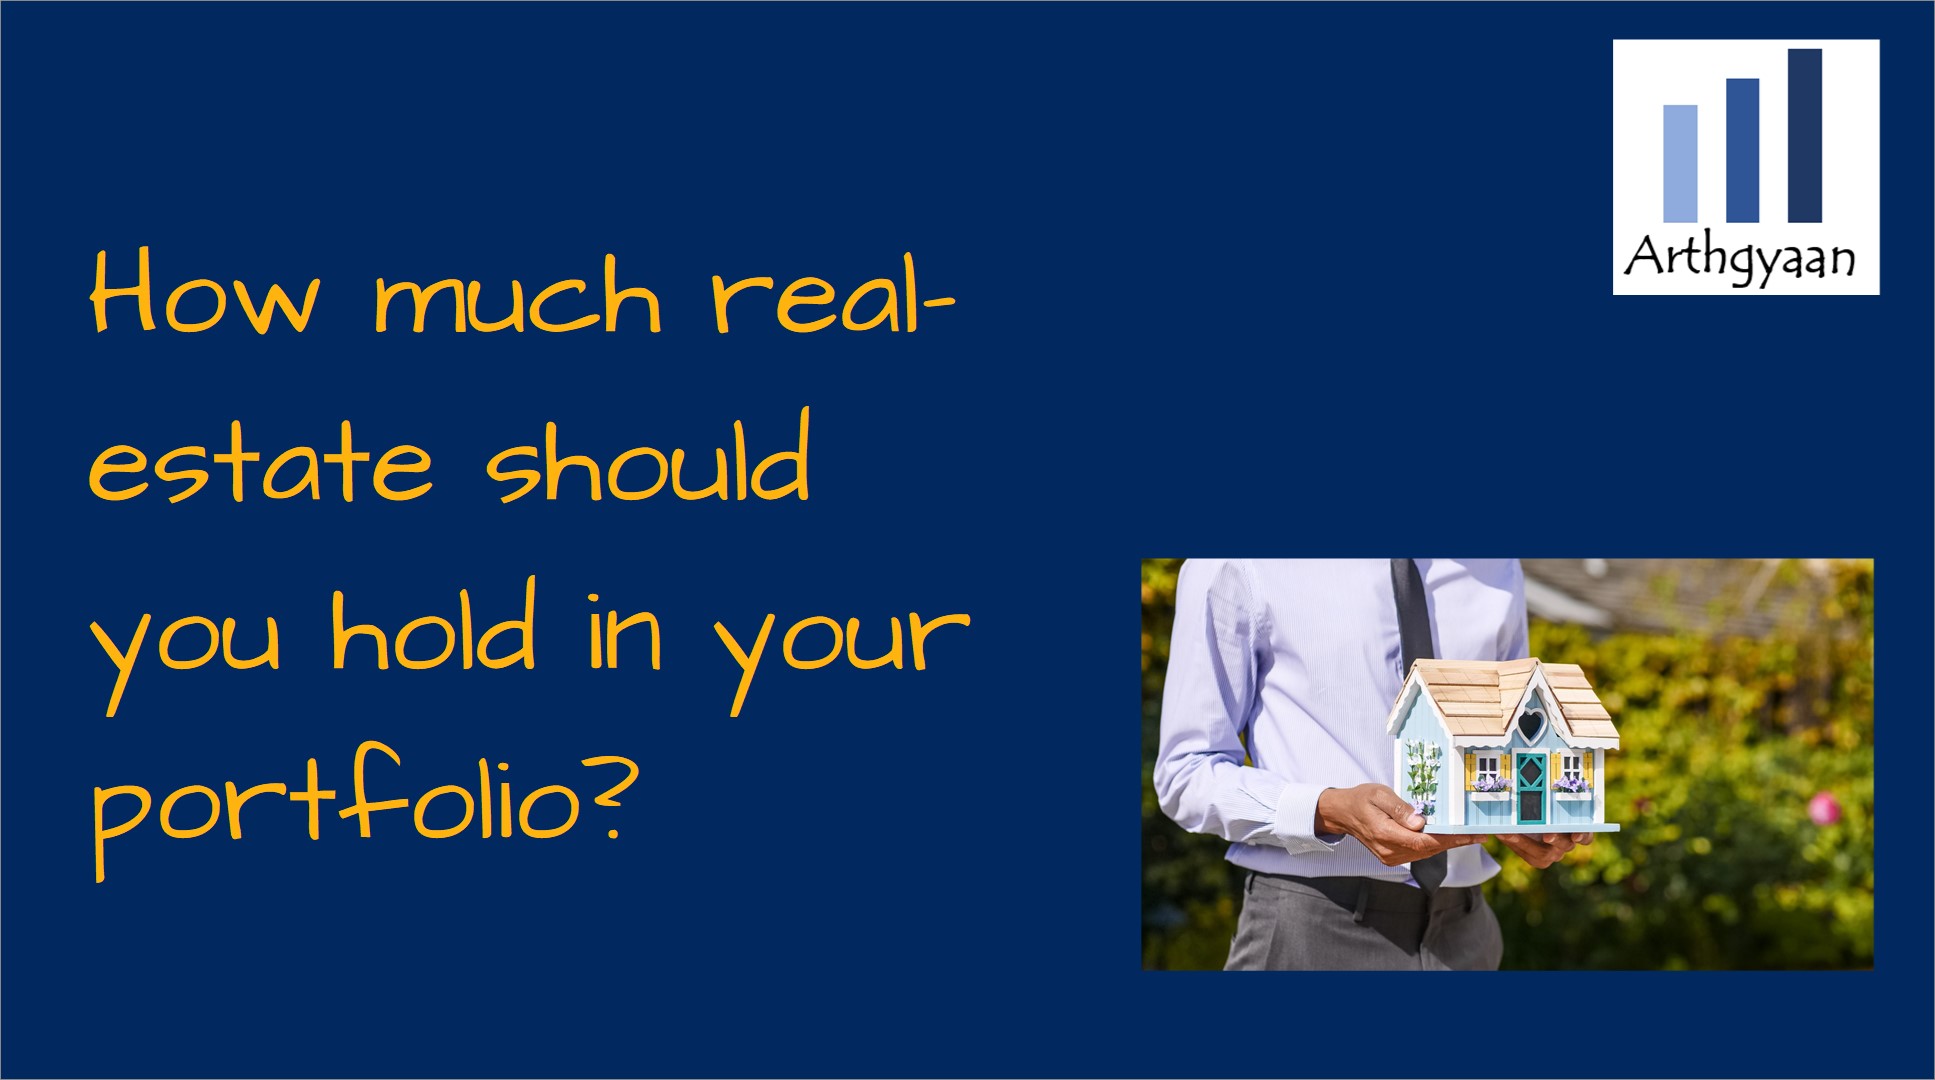 How much real estate should you hold in your portfolio?